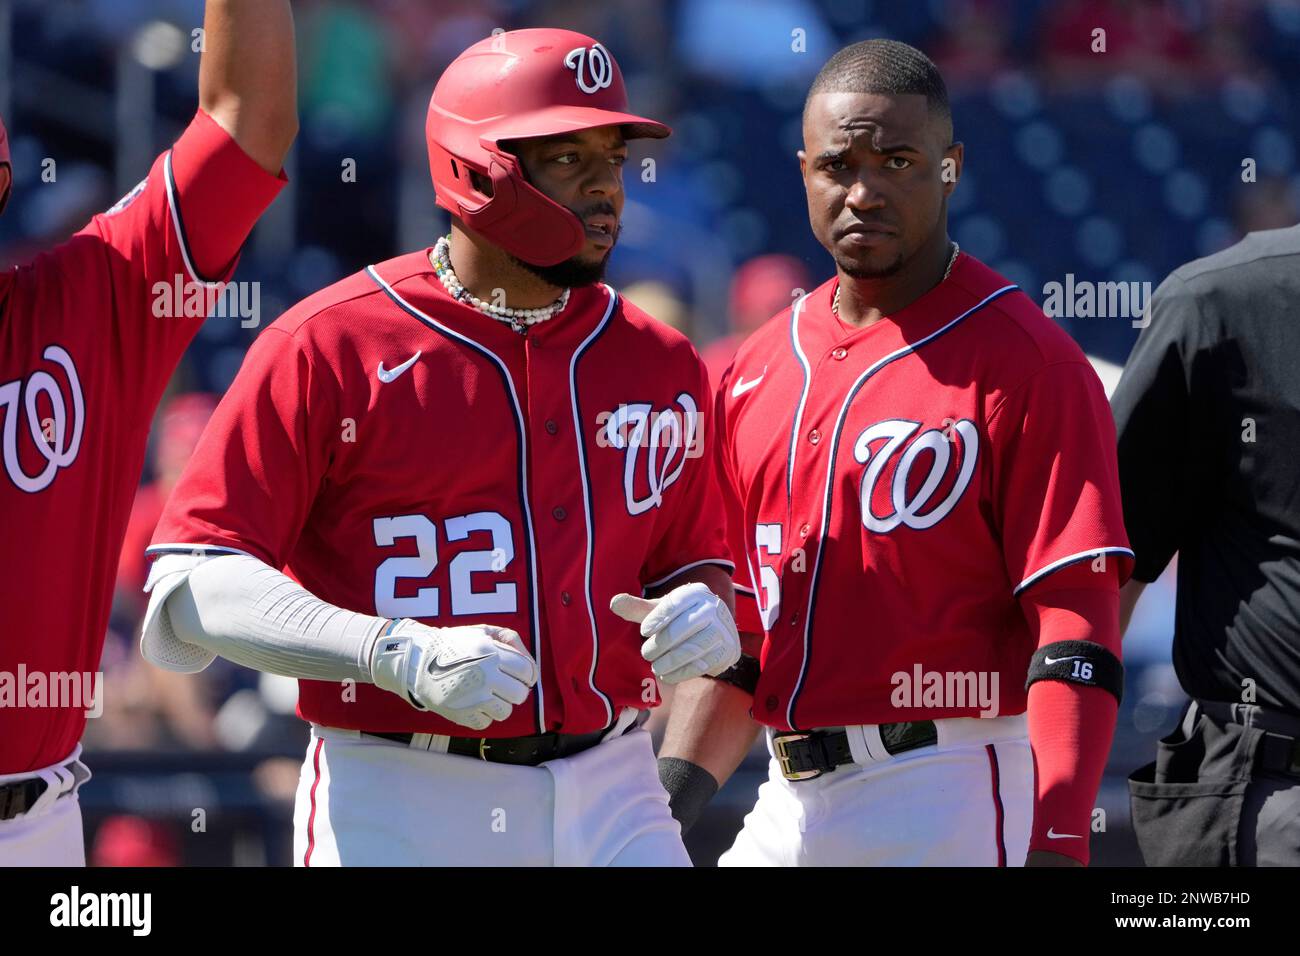 Washington Nationals' Dominic Smith (22) stands with teammate Victor Robles  after being hit by a pitch during the fourth inning of a spring training  baseball game against the St. Louis Cardinals Tuesday